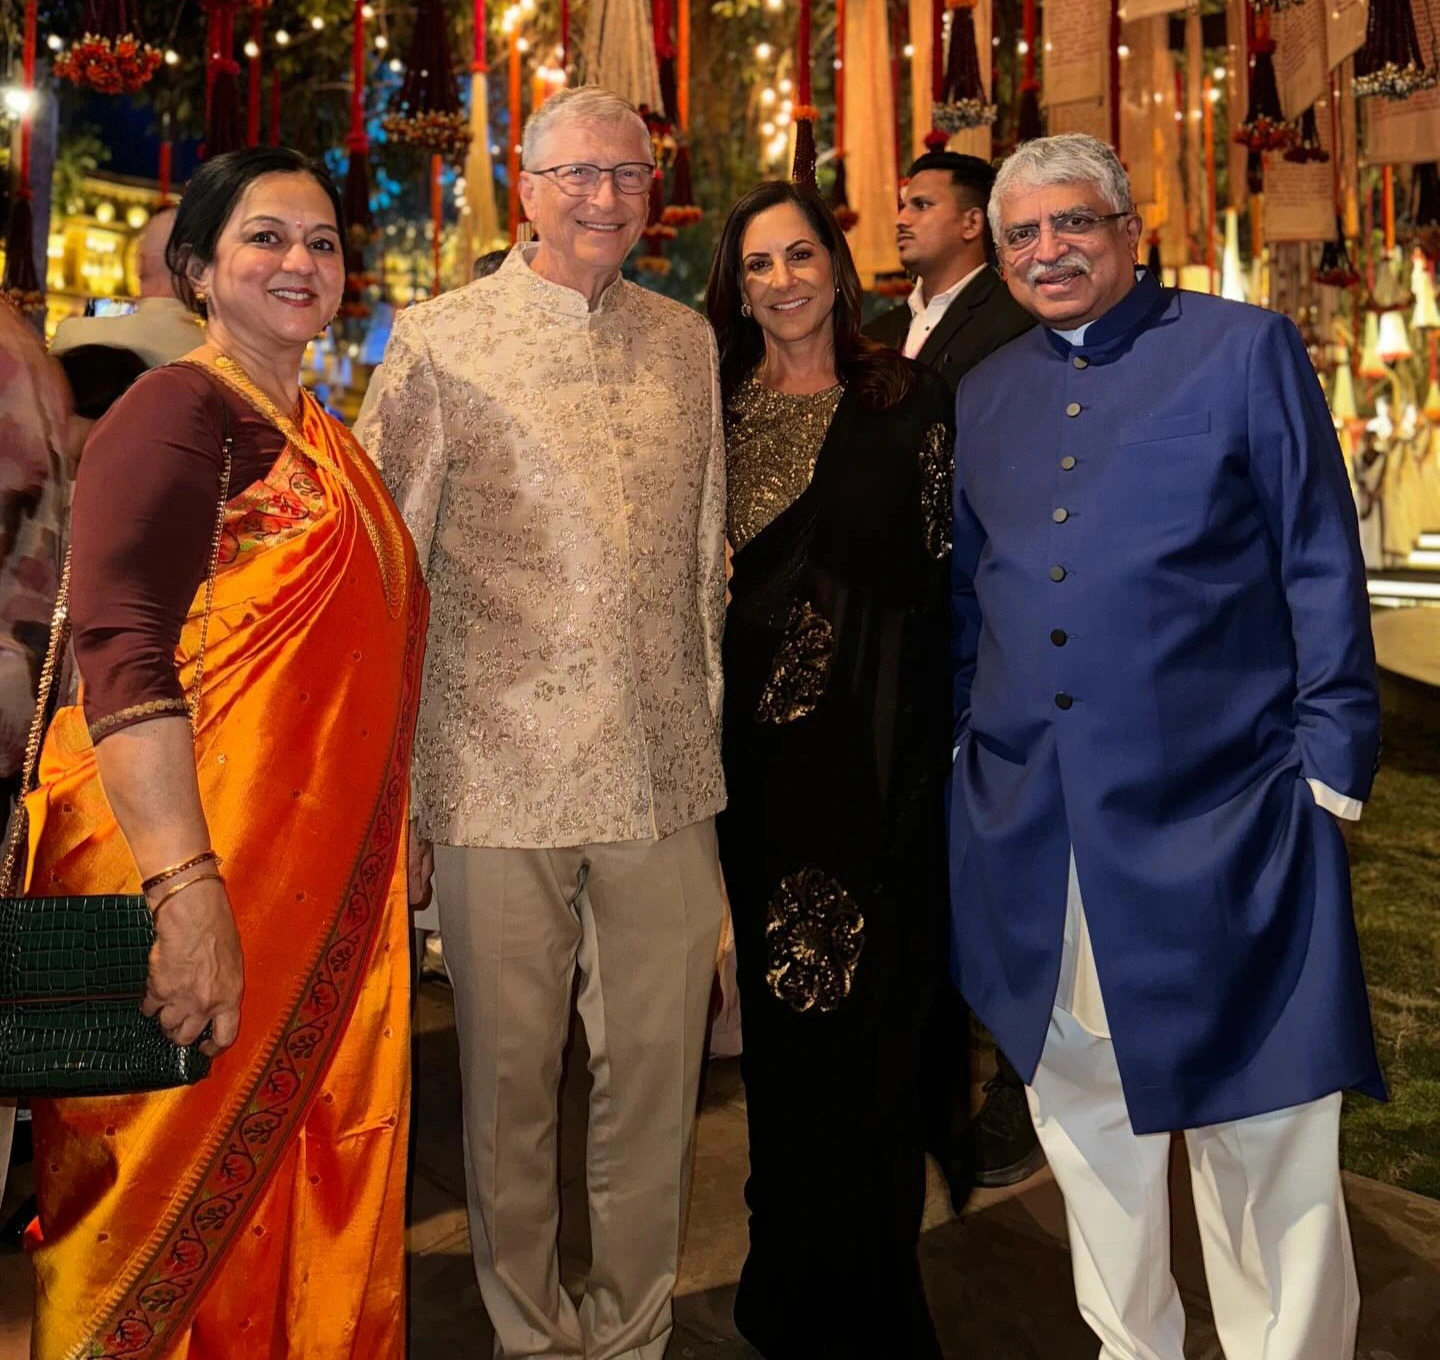 American billionaire Bill Gates (L, 2nd) is seen in India. Photo: Supplied